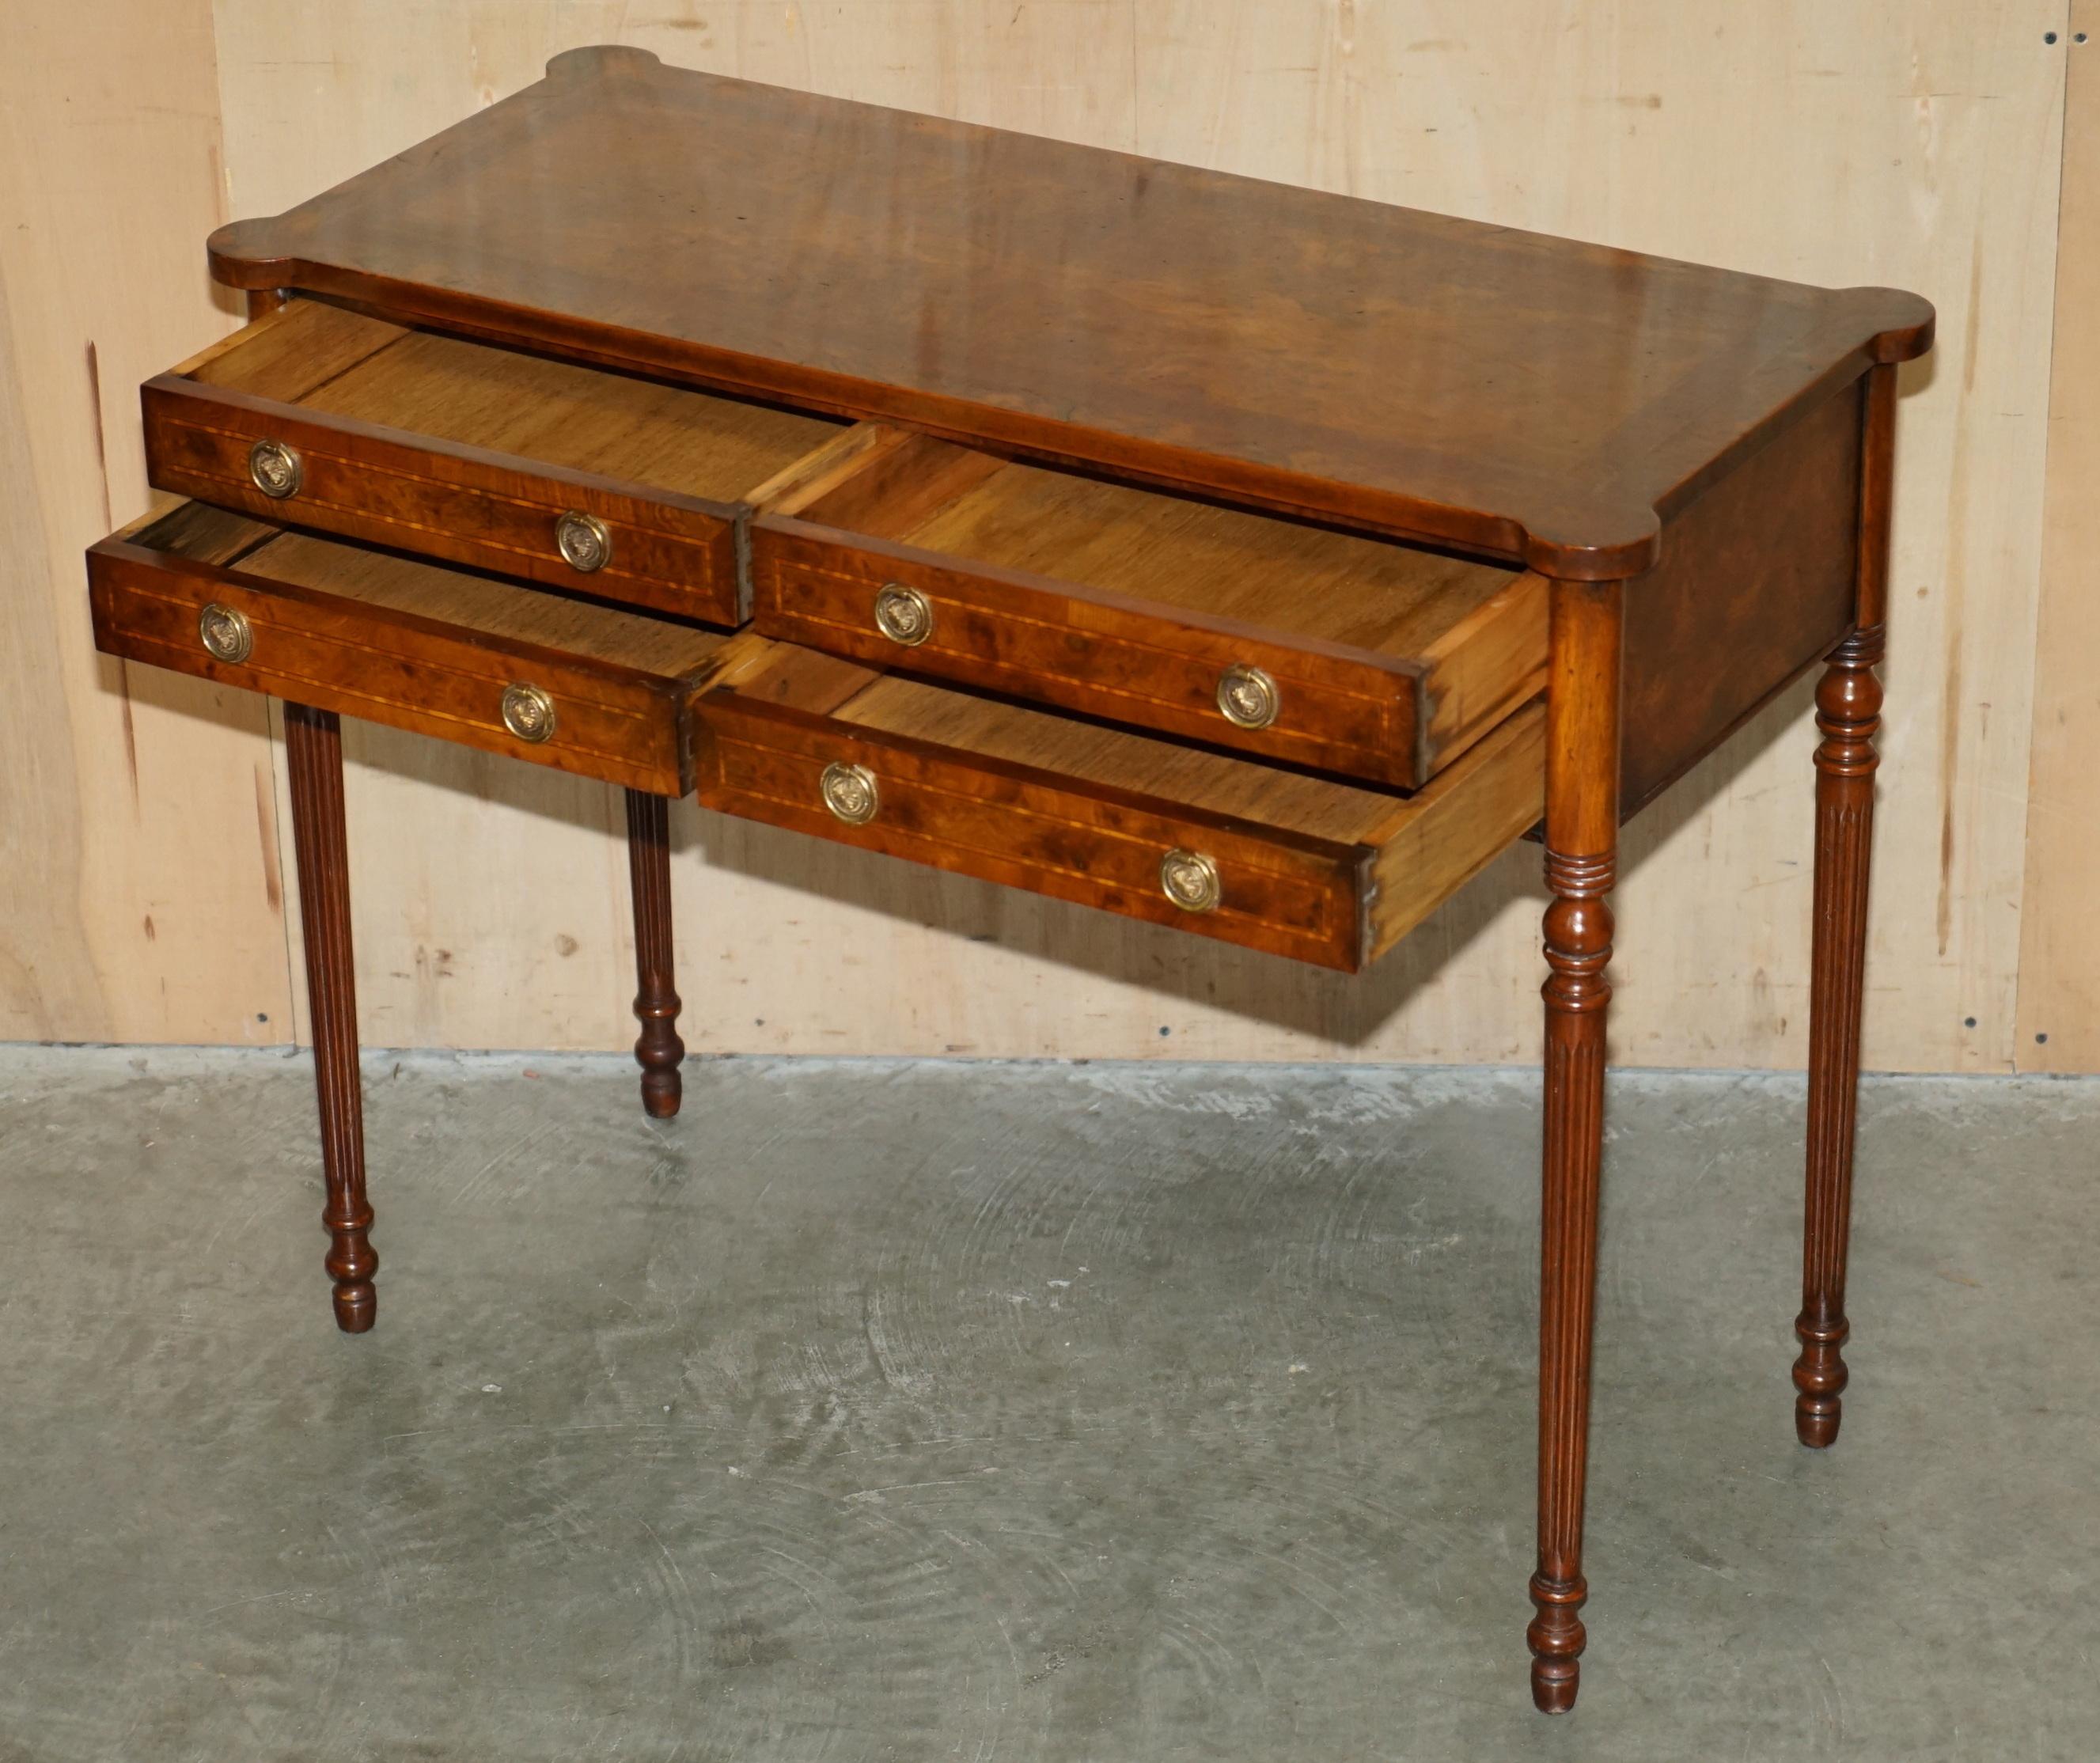 EXQUISITE CIRCA 1920 BURR ELM & SATiNWOOD FRENCH POLISHED RESTORED CONSOLE TABLE For Sale 10